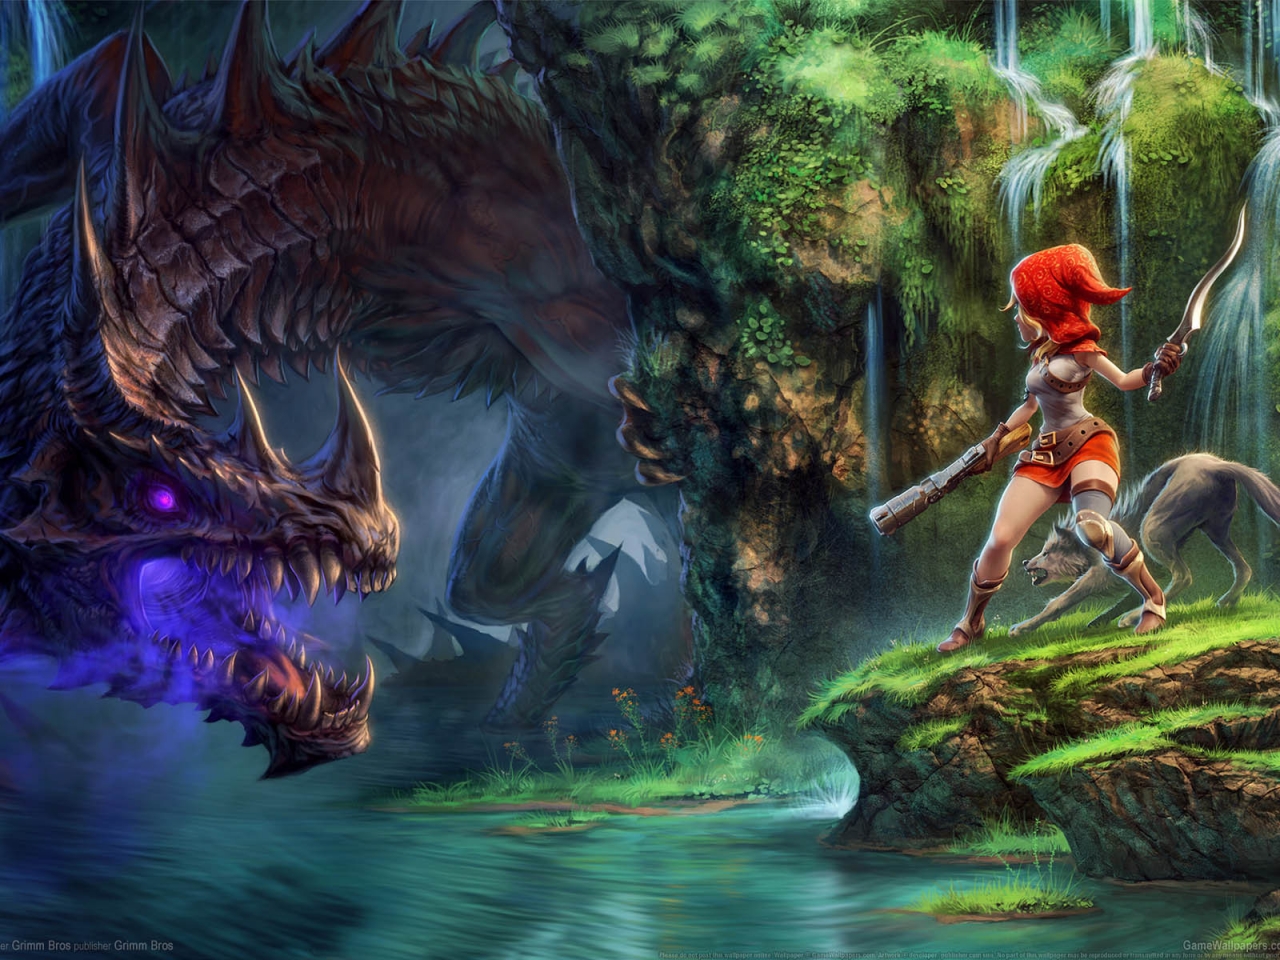 Dragon Fin Soup Game for 1280 x 960 resolution